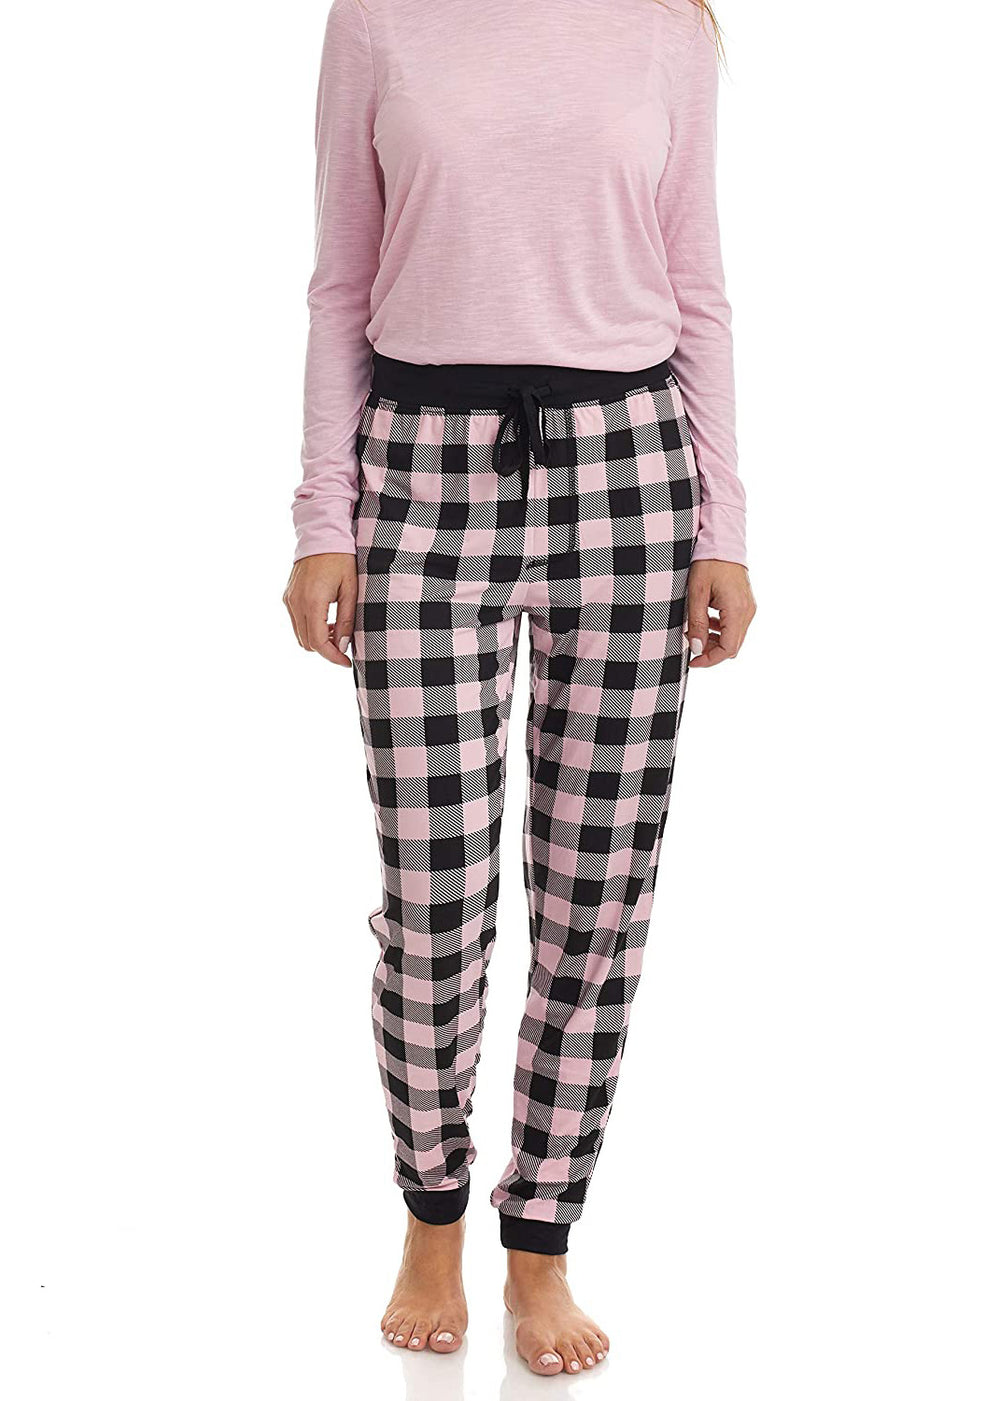 PJ joggers with soft velvety texture, stretch, elastic waistband, drawstring, and stylish ankle cuff. This pattern is a pink and black plaid with a black drawstring